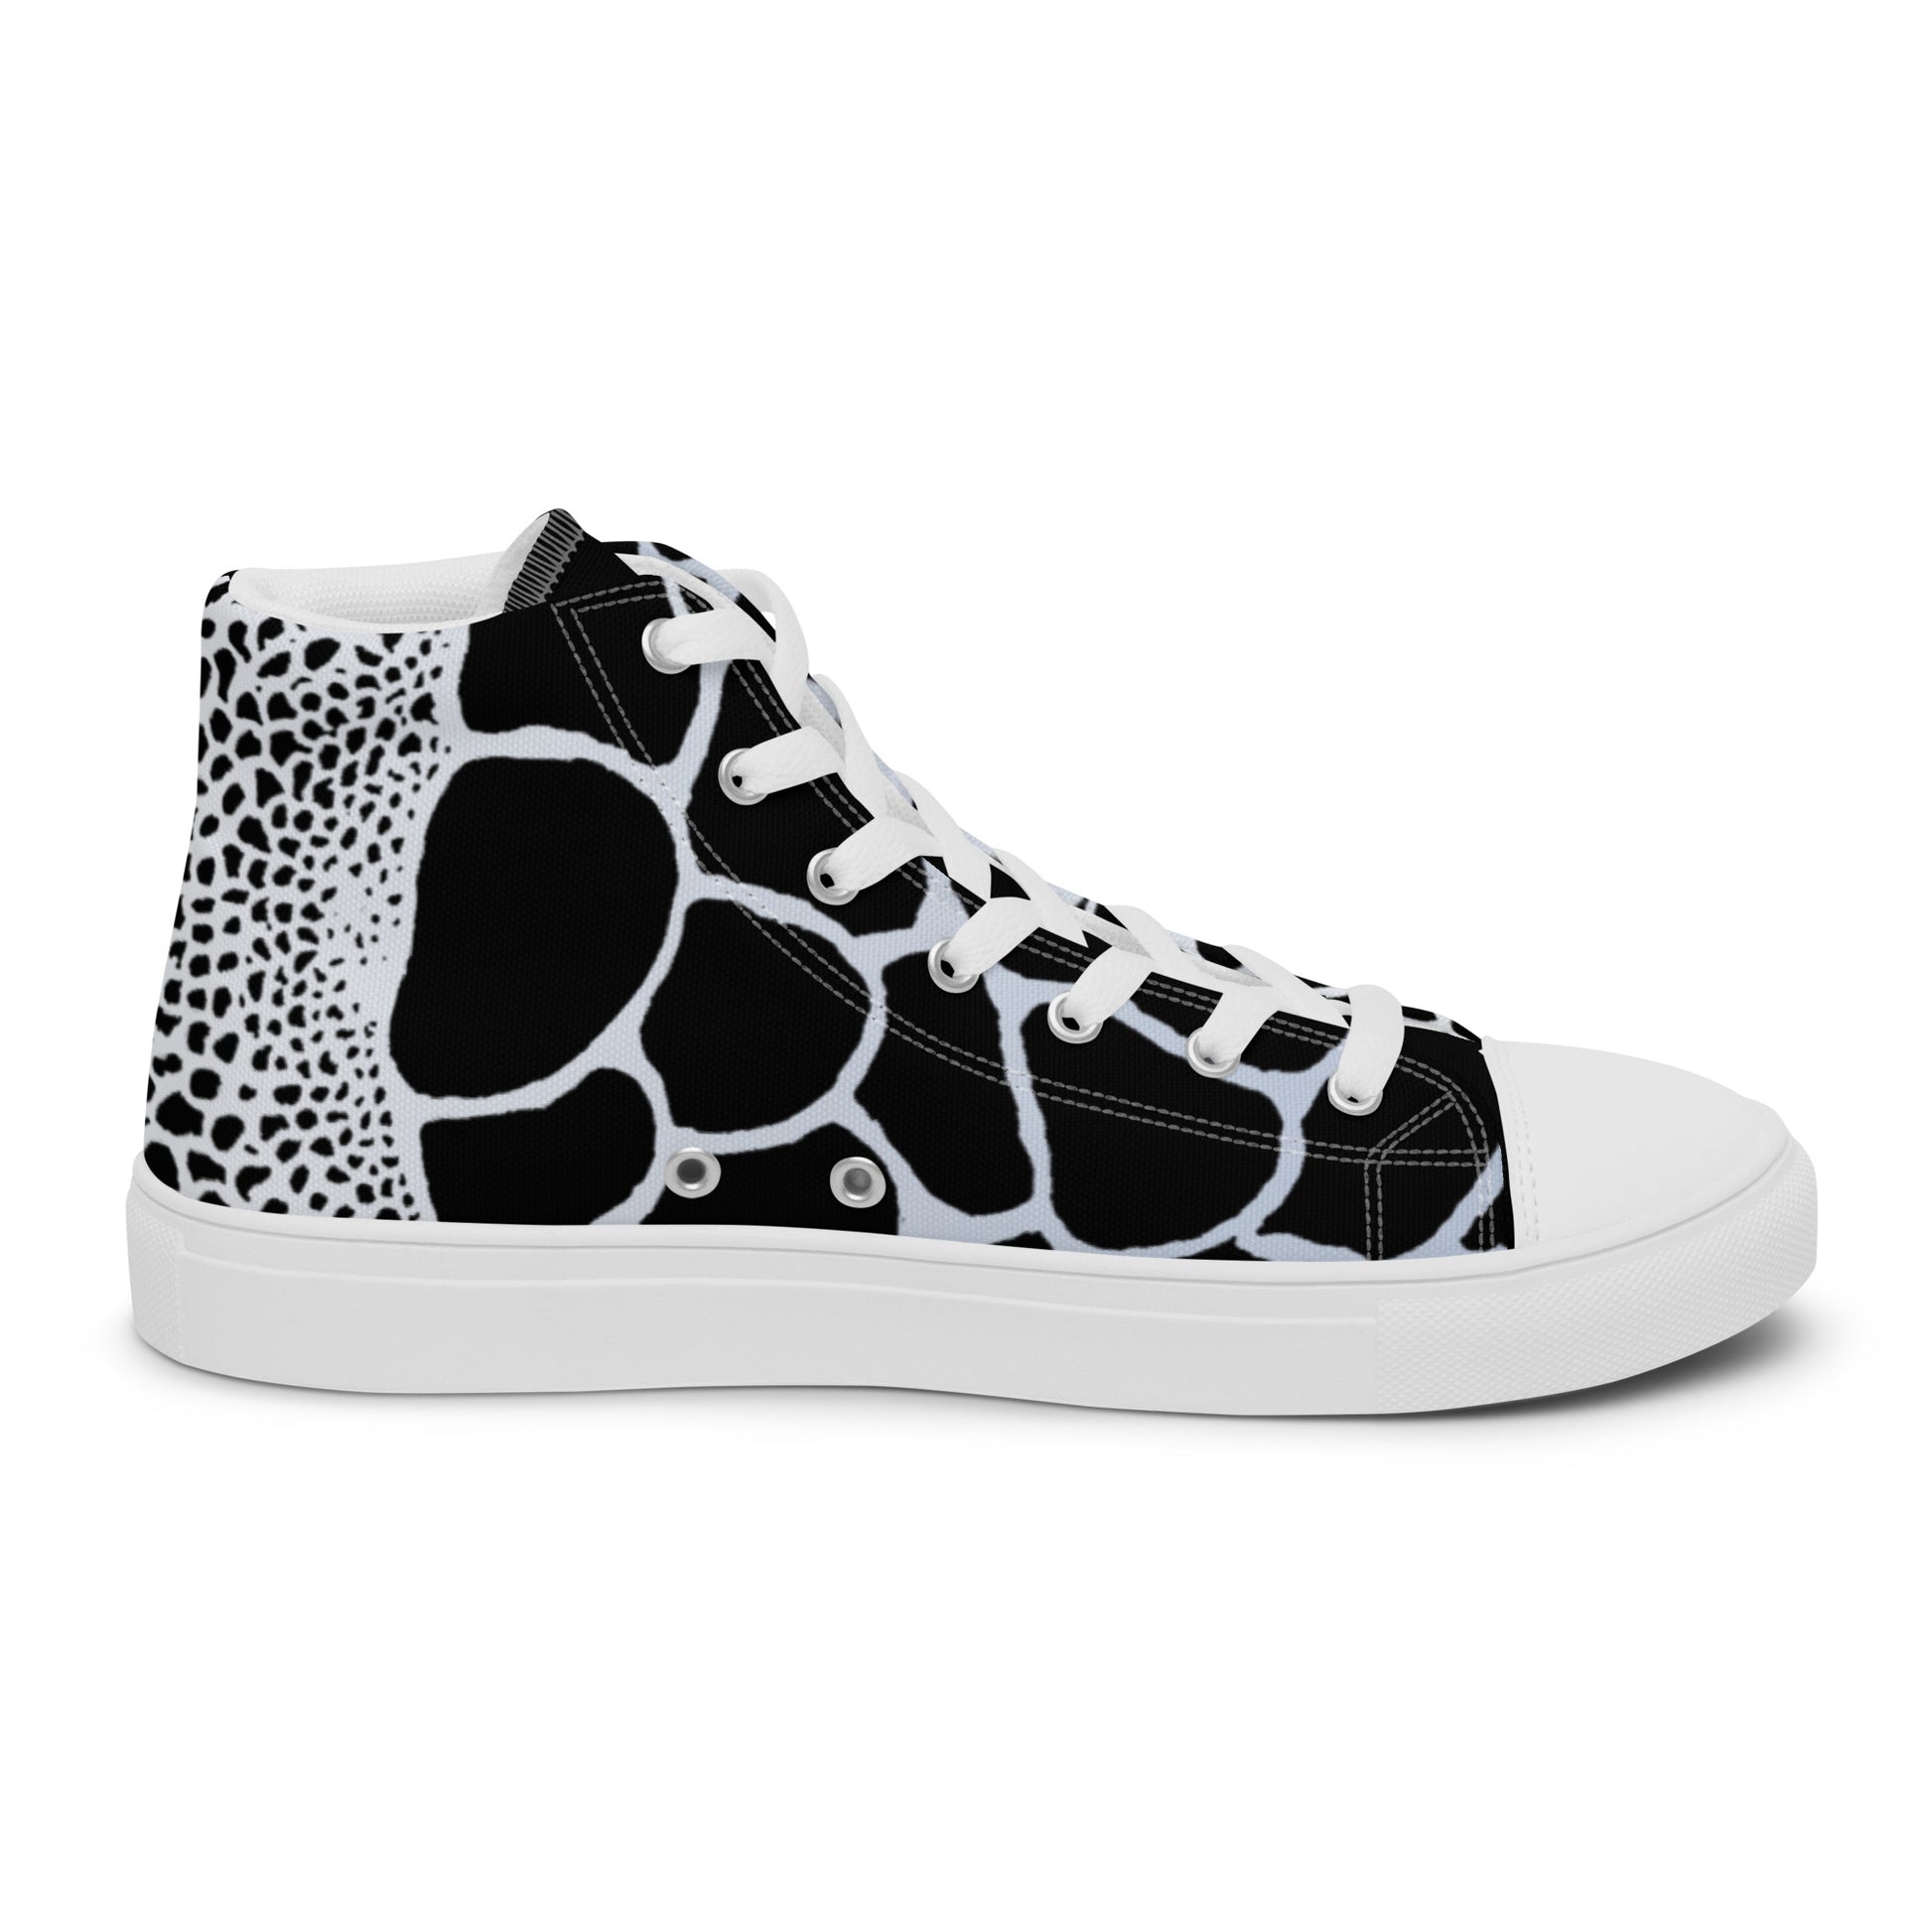 Organic Black Print Women’s High Top Canvas Shoes | Casual Print Shoes | Stylish Festival Sneakers | Abstract Shoes | Lace Up Sneakers | - Comfortable Culture - Shoes - Comfortable Culture